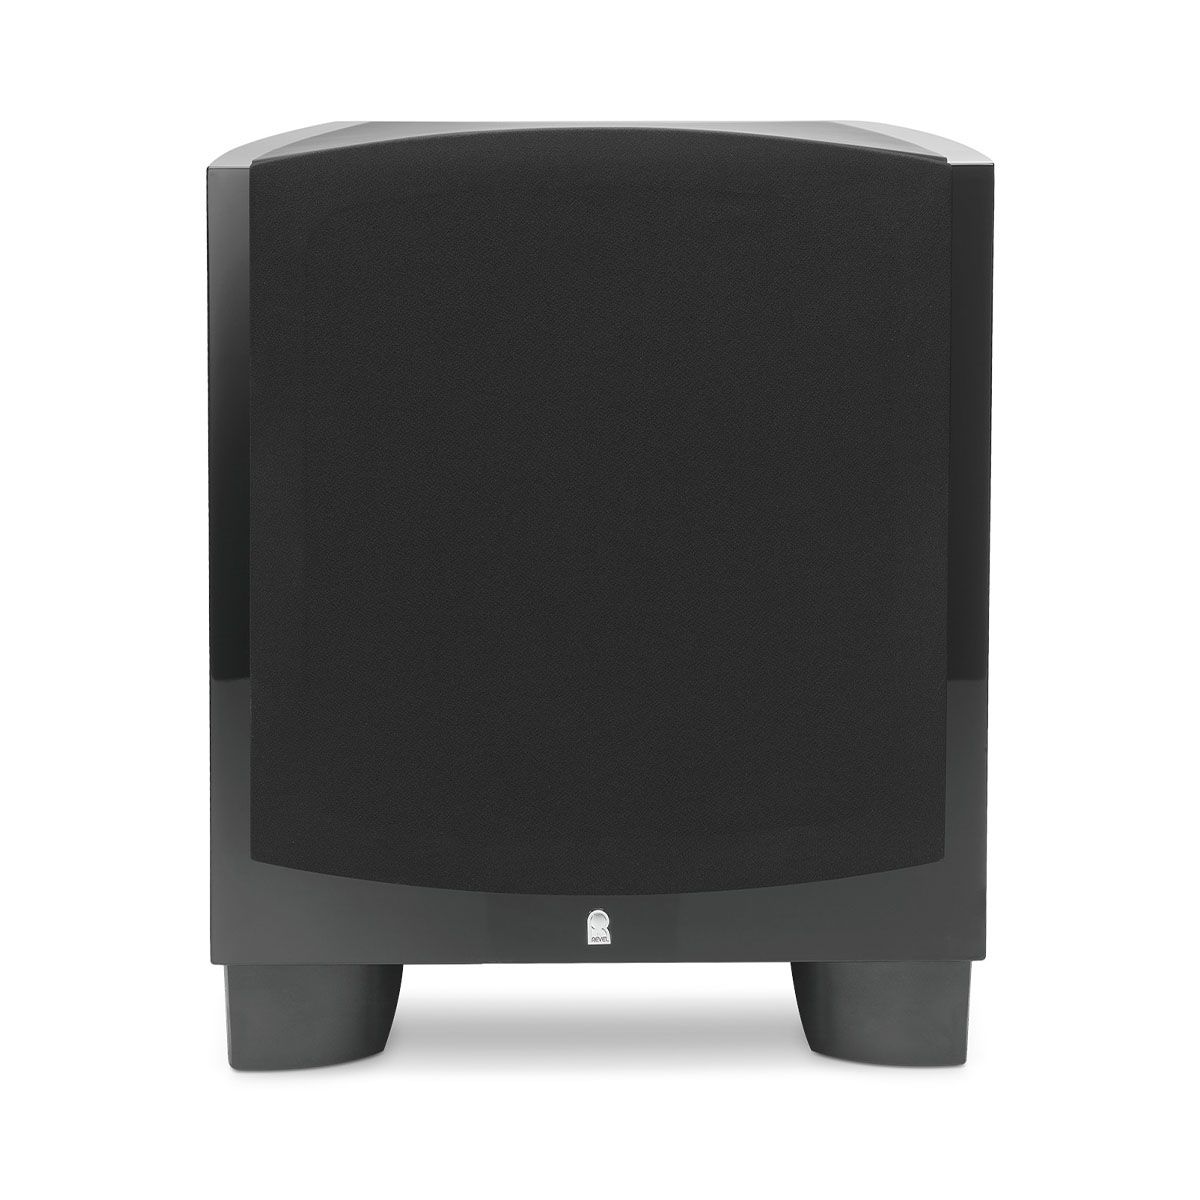 Revel B110v2 10” 1000W Powered Subwoofer - single black with grille - front view